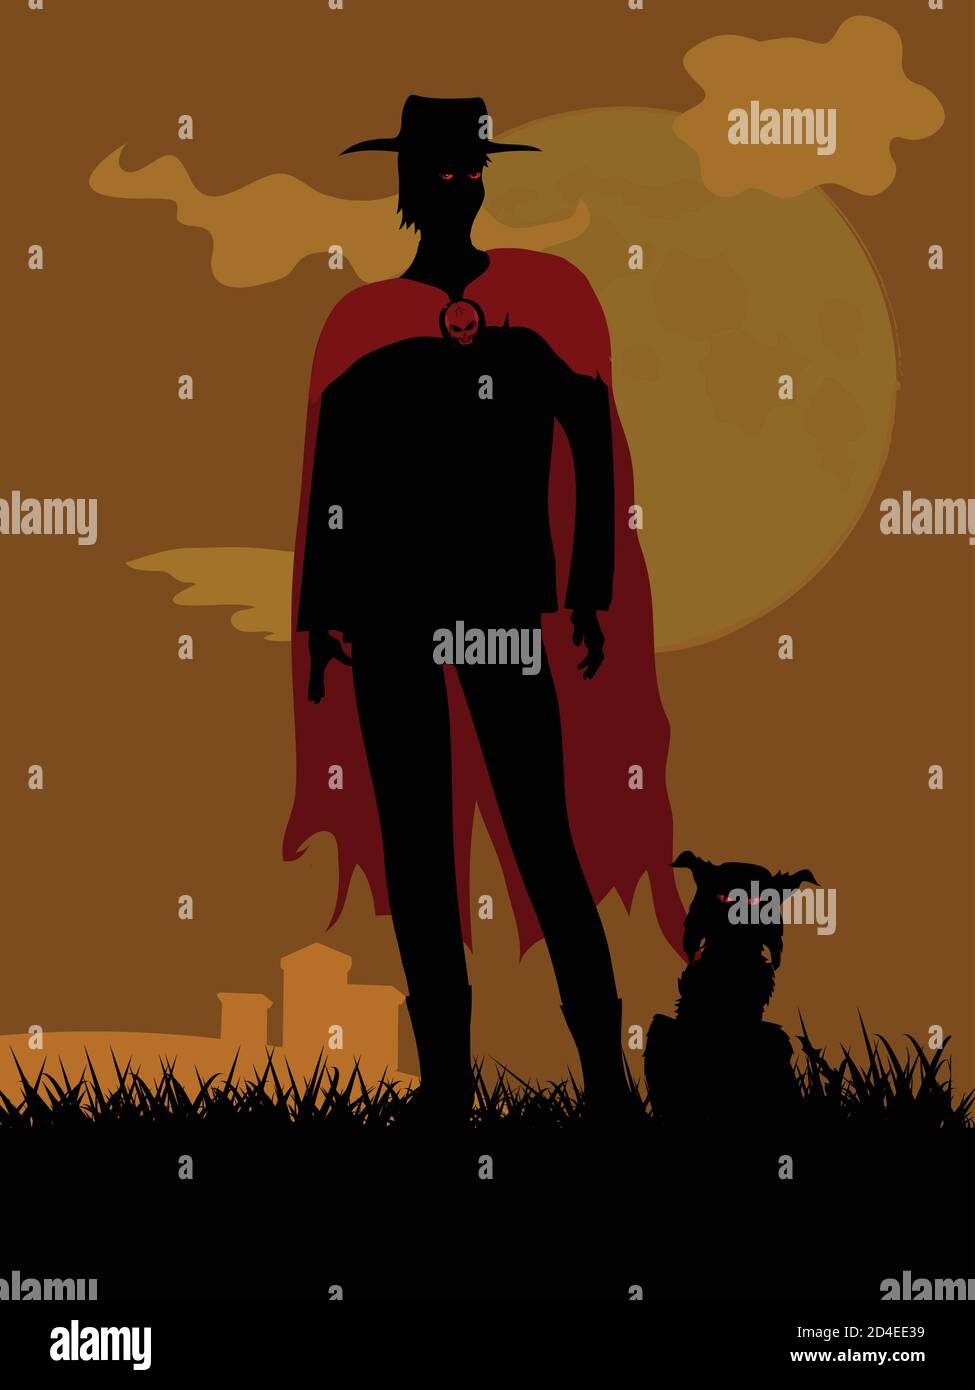 Black Silhouette Of Creepy Man Red Eyes With Hat And Red Cloak With Skull Button And Spooky Cat With Red Eyes Over Grass Graveyard And Big Scary Moon Stock Vector